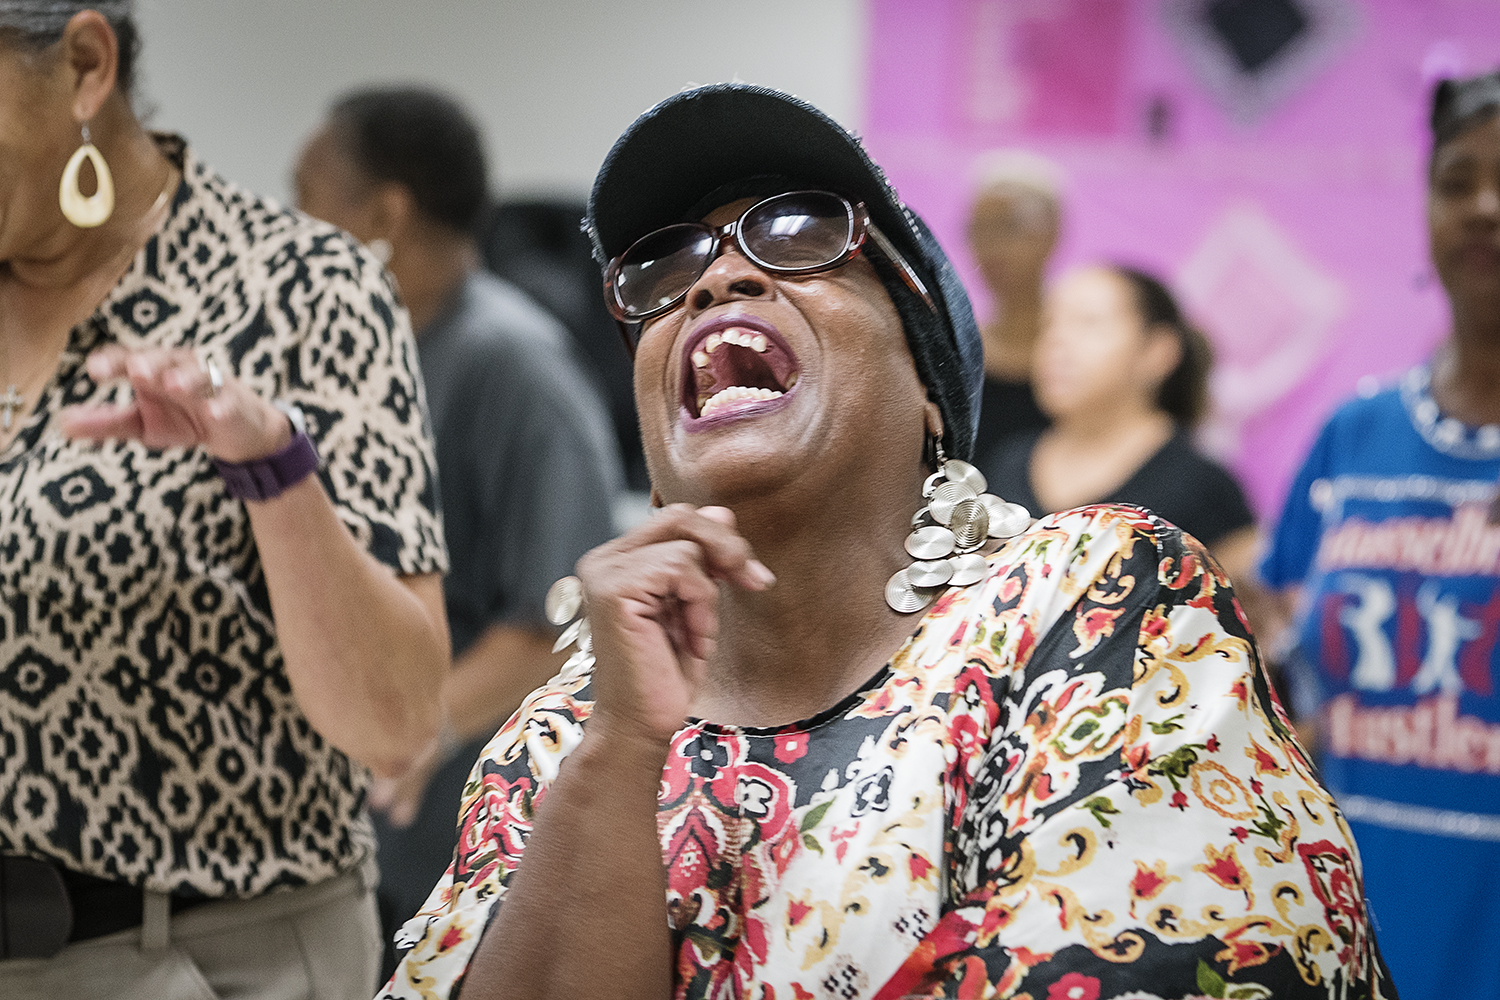 Flint resident Ethel Brown laughs as she dances with the other Hasselbring Hustlers at the Hasselbring Senior Community Center. Over the past three years, Brown has seen positive results from dancing, including weight loss and better mobility. 